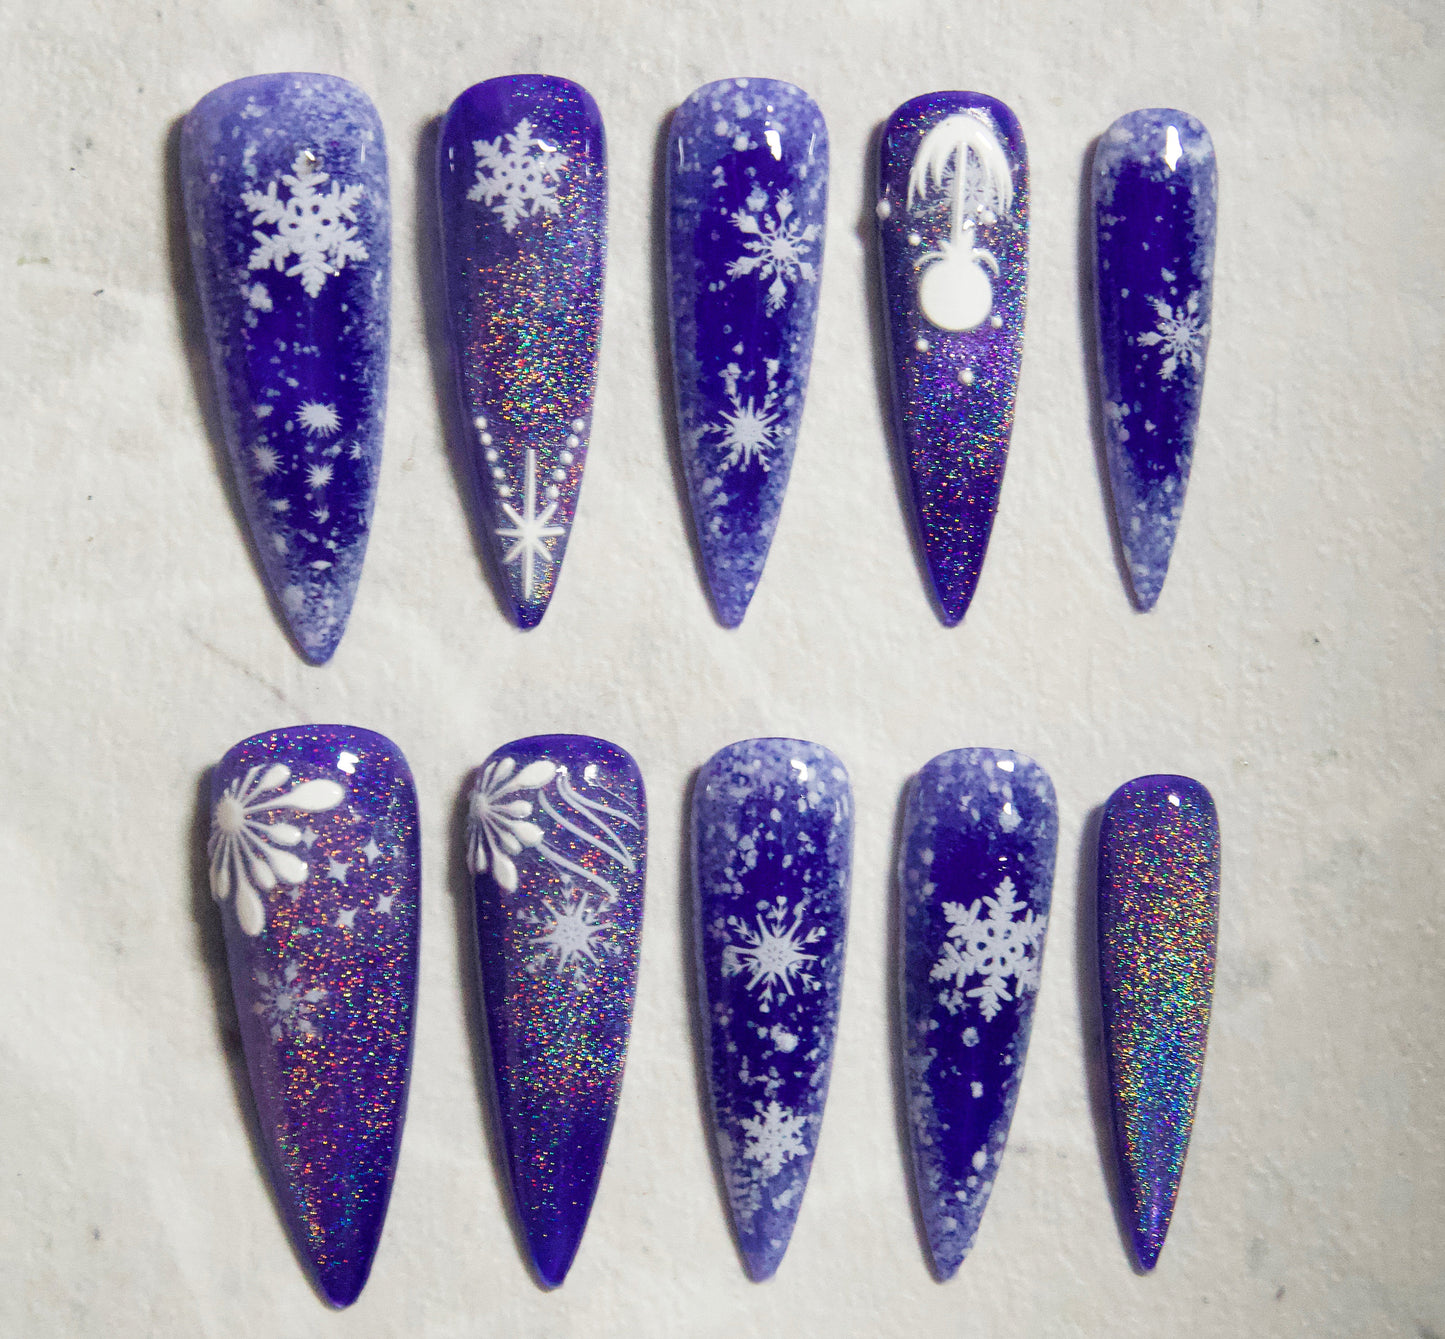 Winter Snow Flake White Nail Art Stickers Self Decals/ Christmas 3D Embossed Textured Peel off Nails Sticker